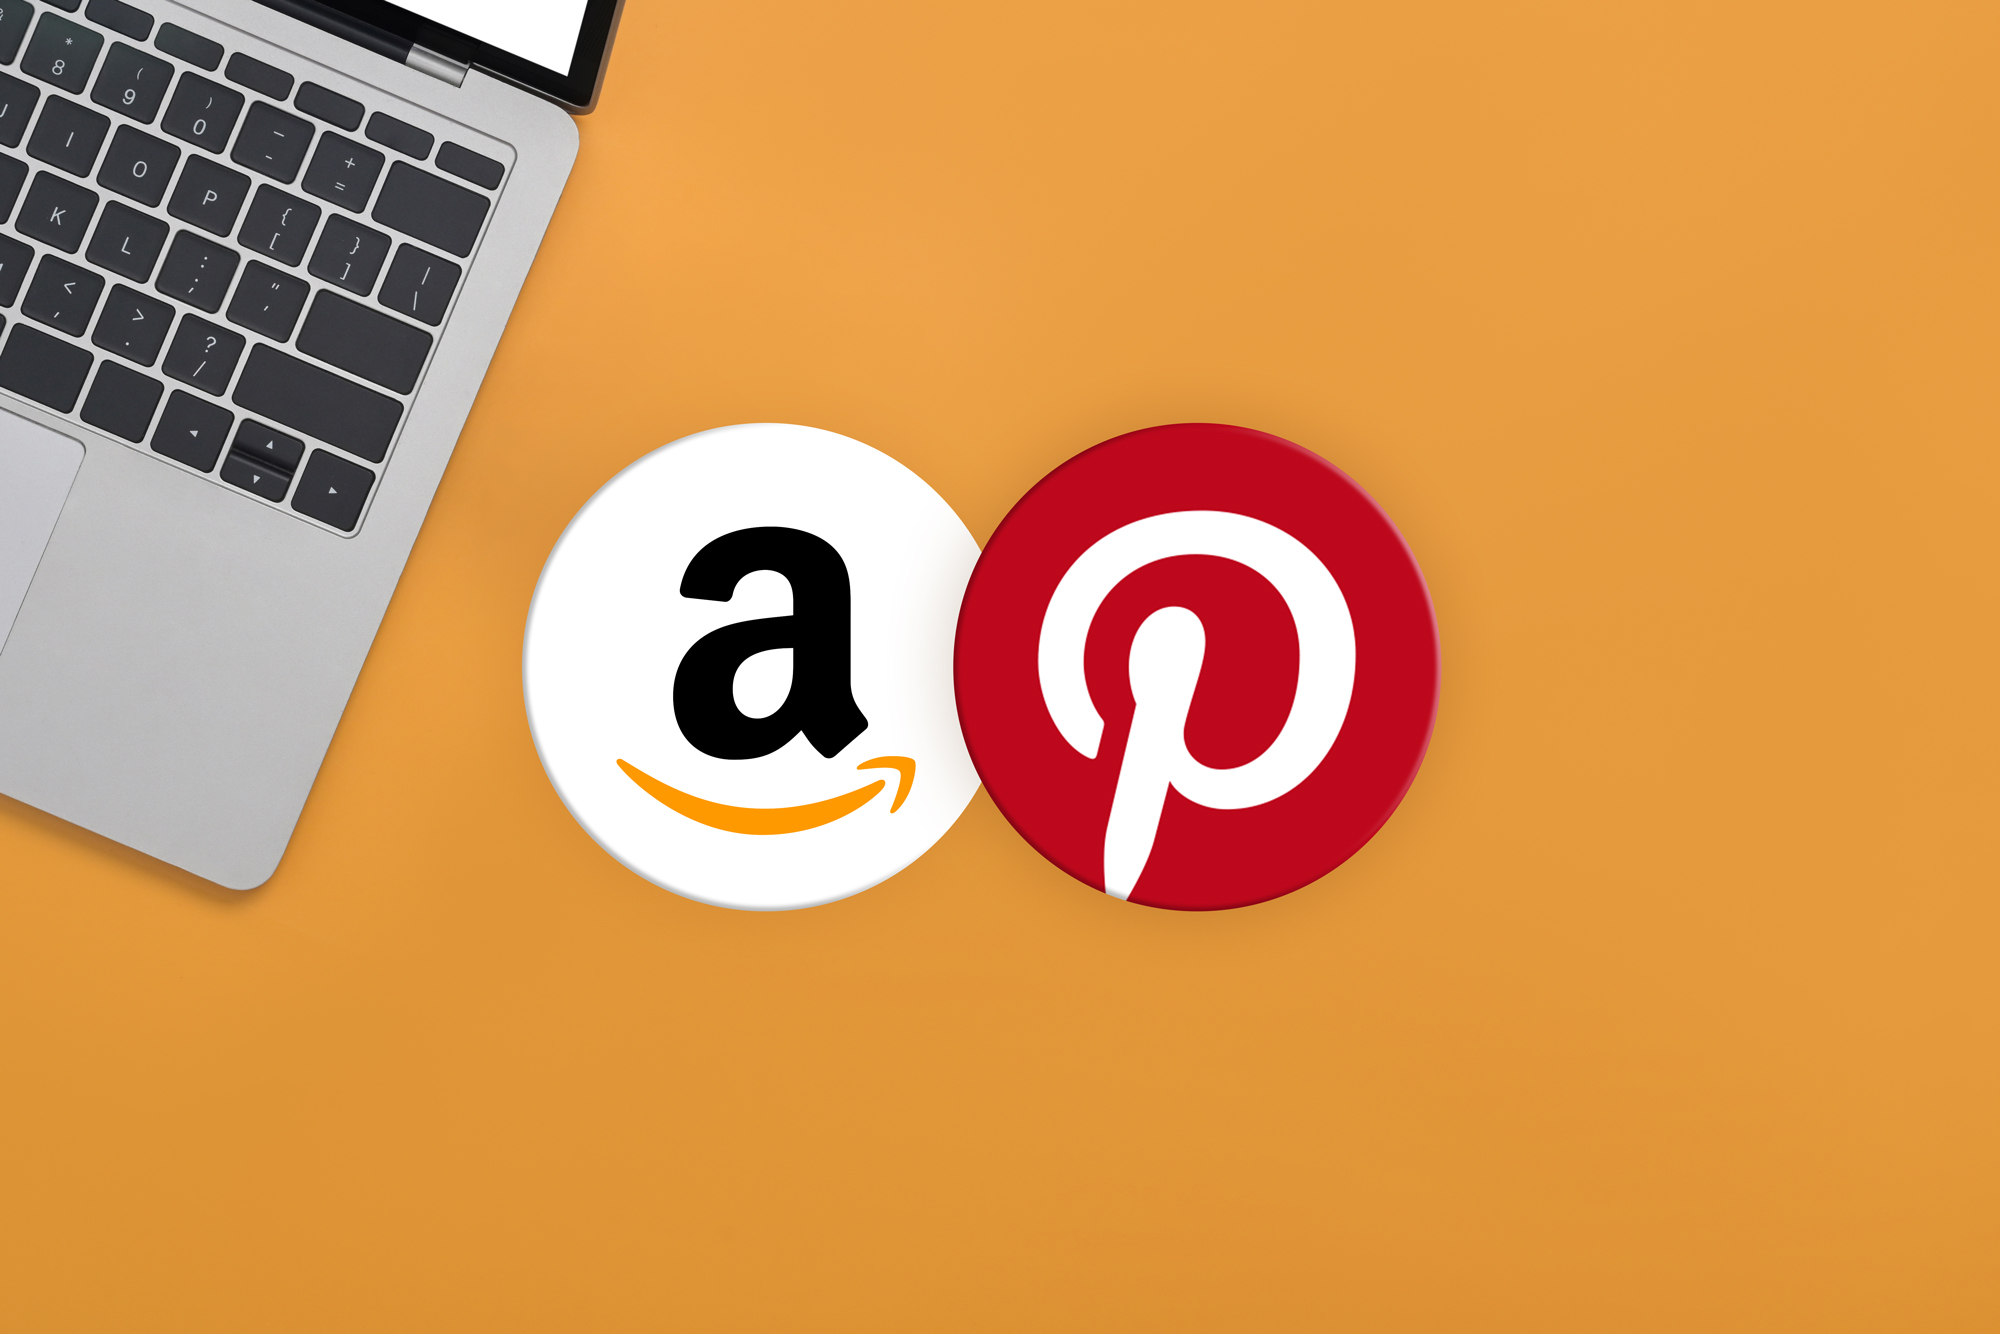 Pin It To Win It: Pinterest & Amazon Team Up For Ad-tastic Partnership 